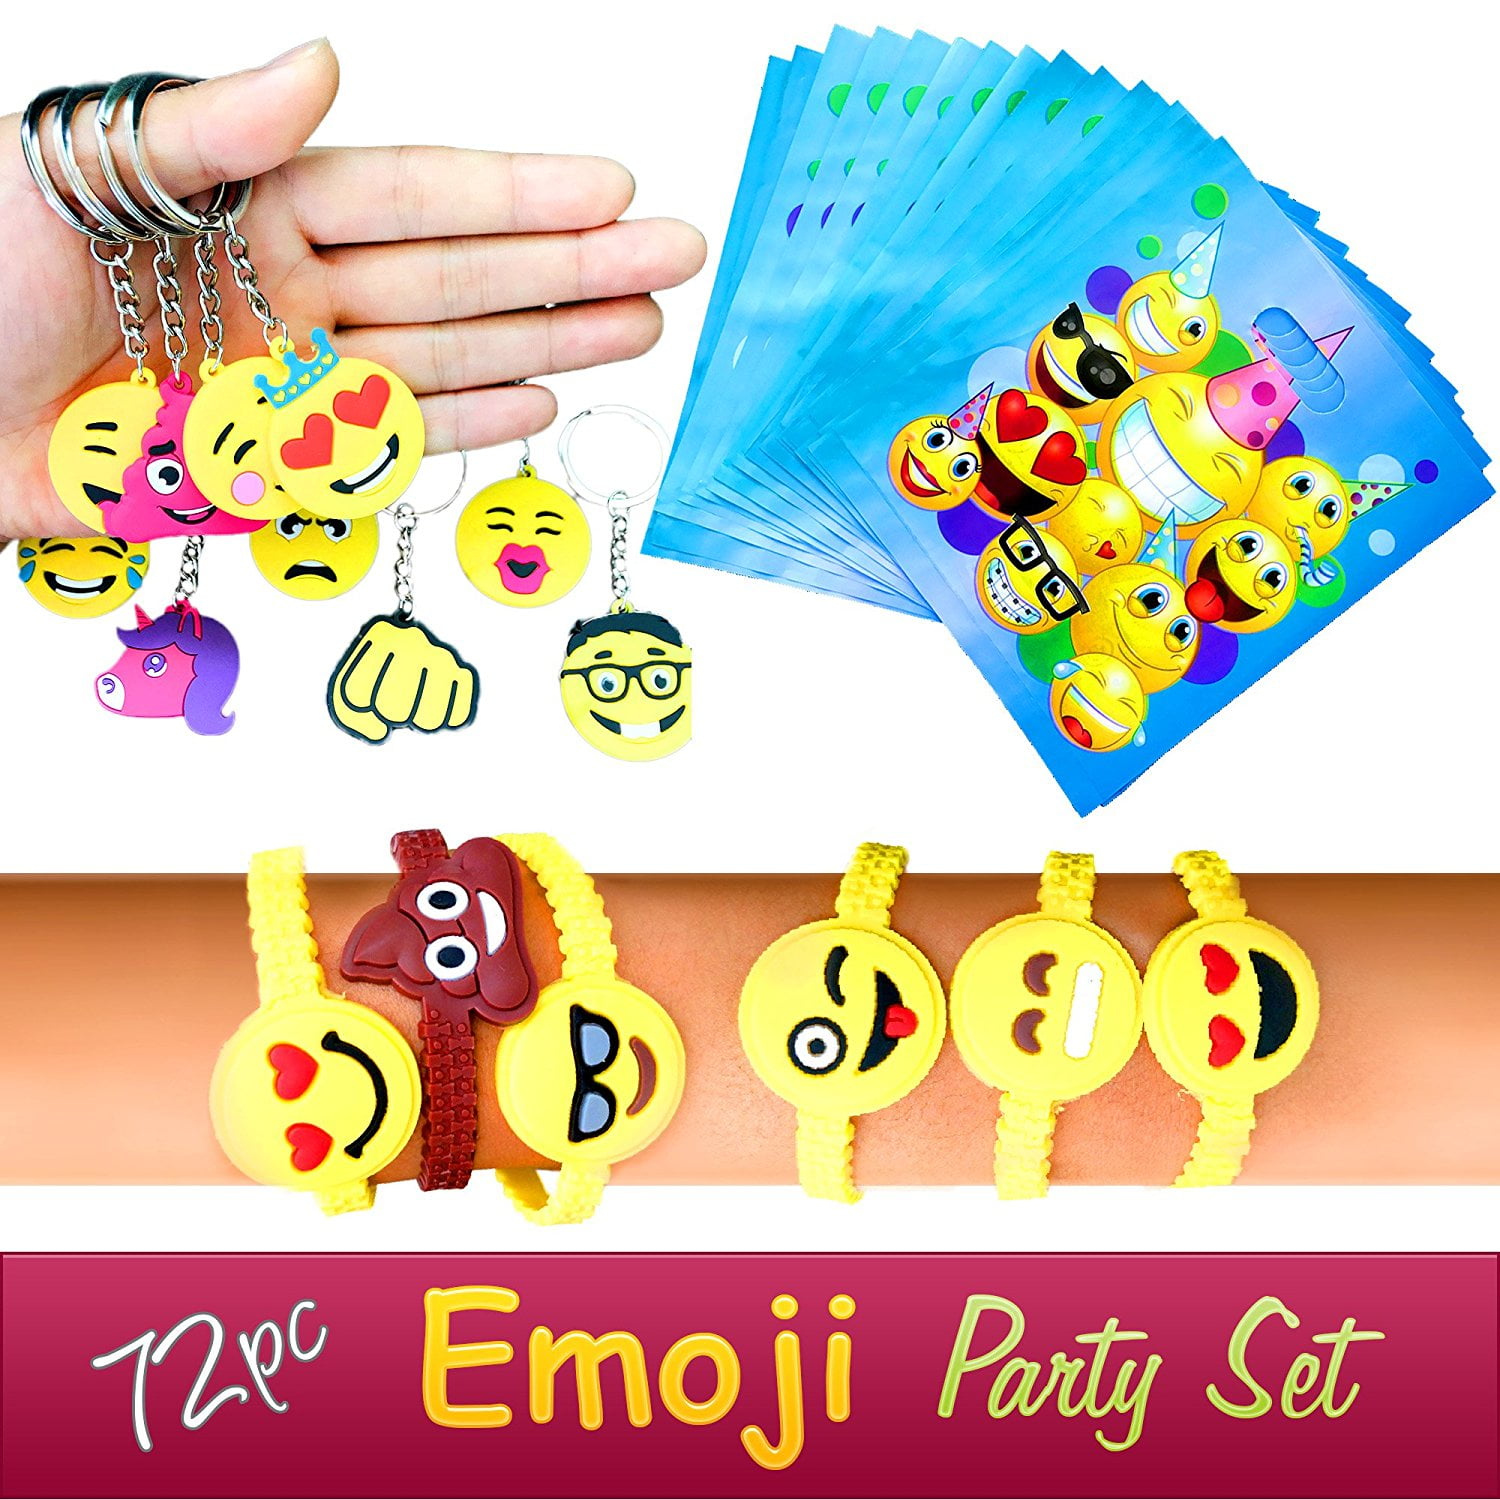 Tongue 50PC Emoji Shopping Plastic Bags Cute Glossy Merchandise Handy Retail Favor for Childrens Birthday Party Gift Smile Kiddie Treats Such as Toys and Candies 12 x 9 Yellow Brown